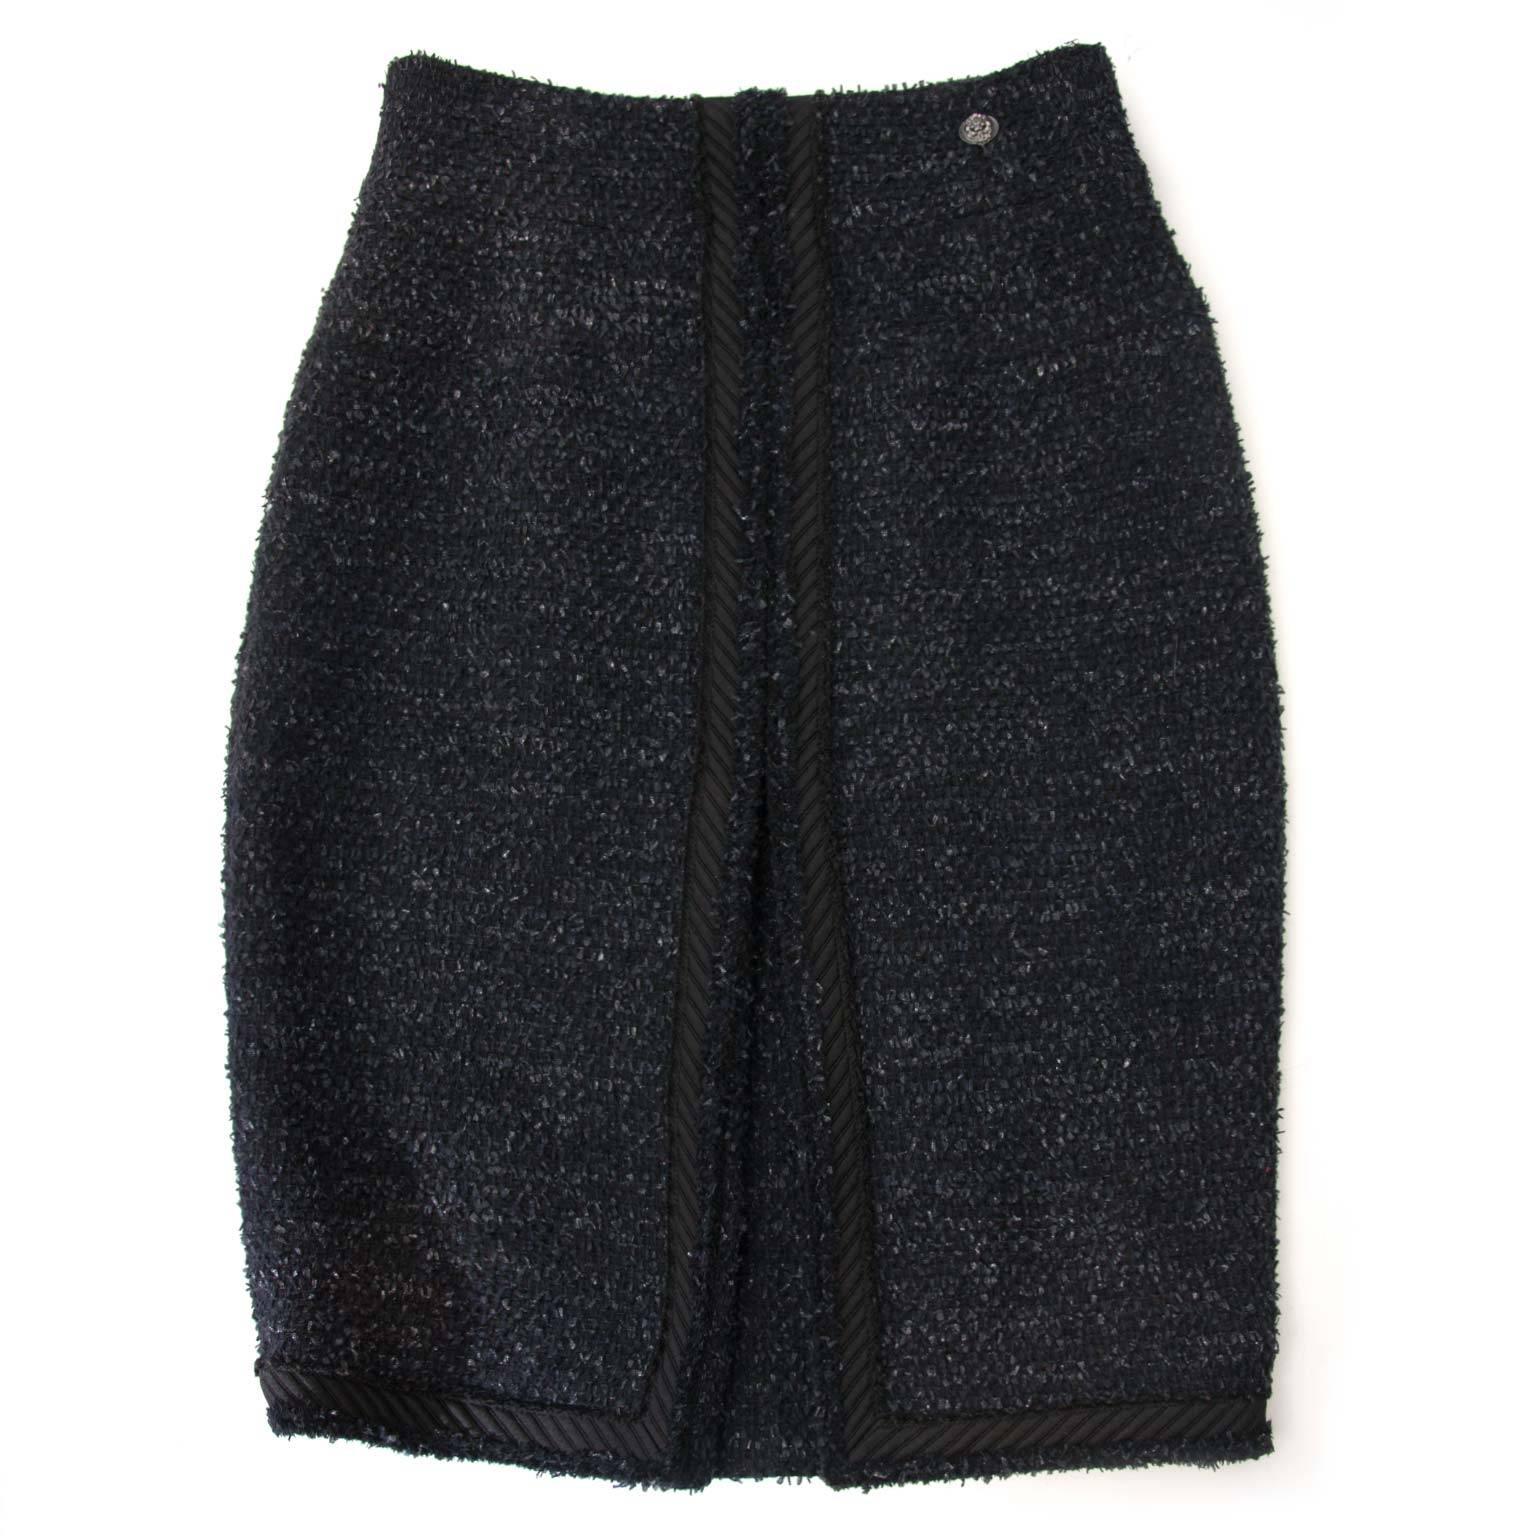 Excellent Condition!

Chanel Black & Blue Tweed Midi Skirt - Size 38 (FR)

When you think of the iconic house of Chanel, you immediatly think elegance, class and style. This beautiful tweed skirt has black, dark blue and a touch of metallic